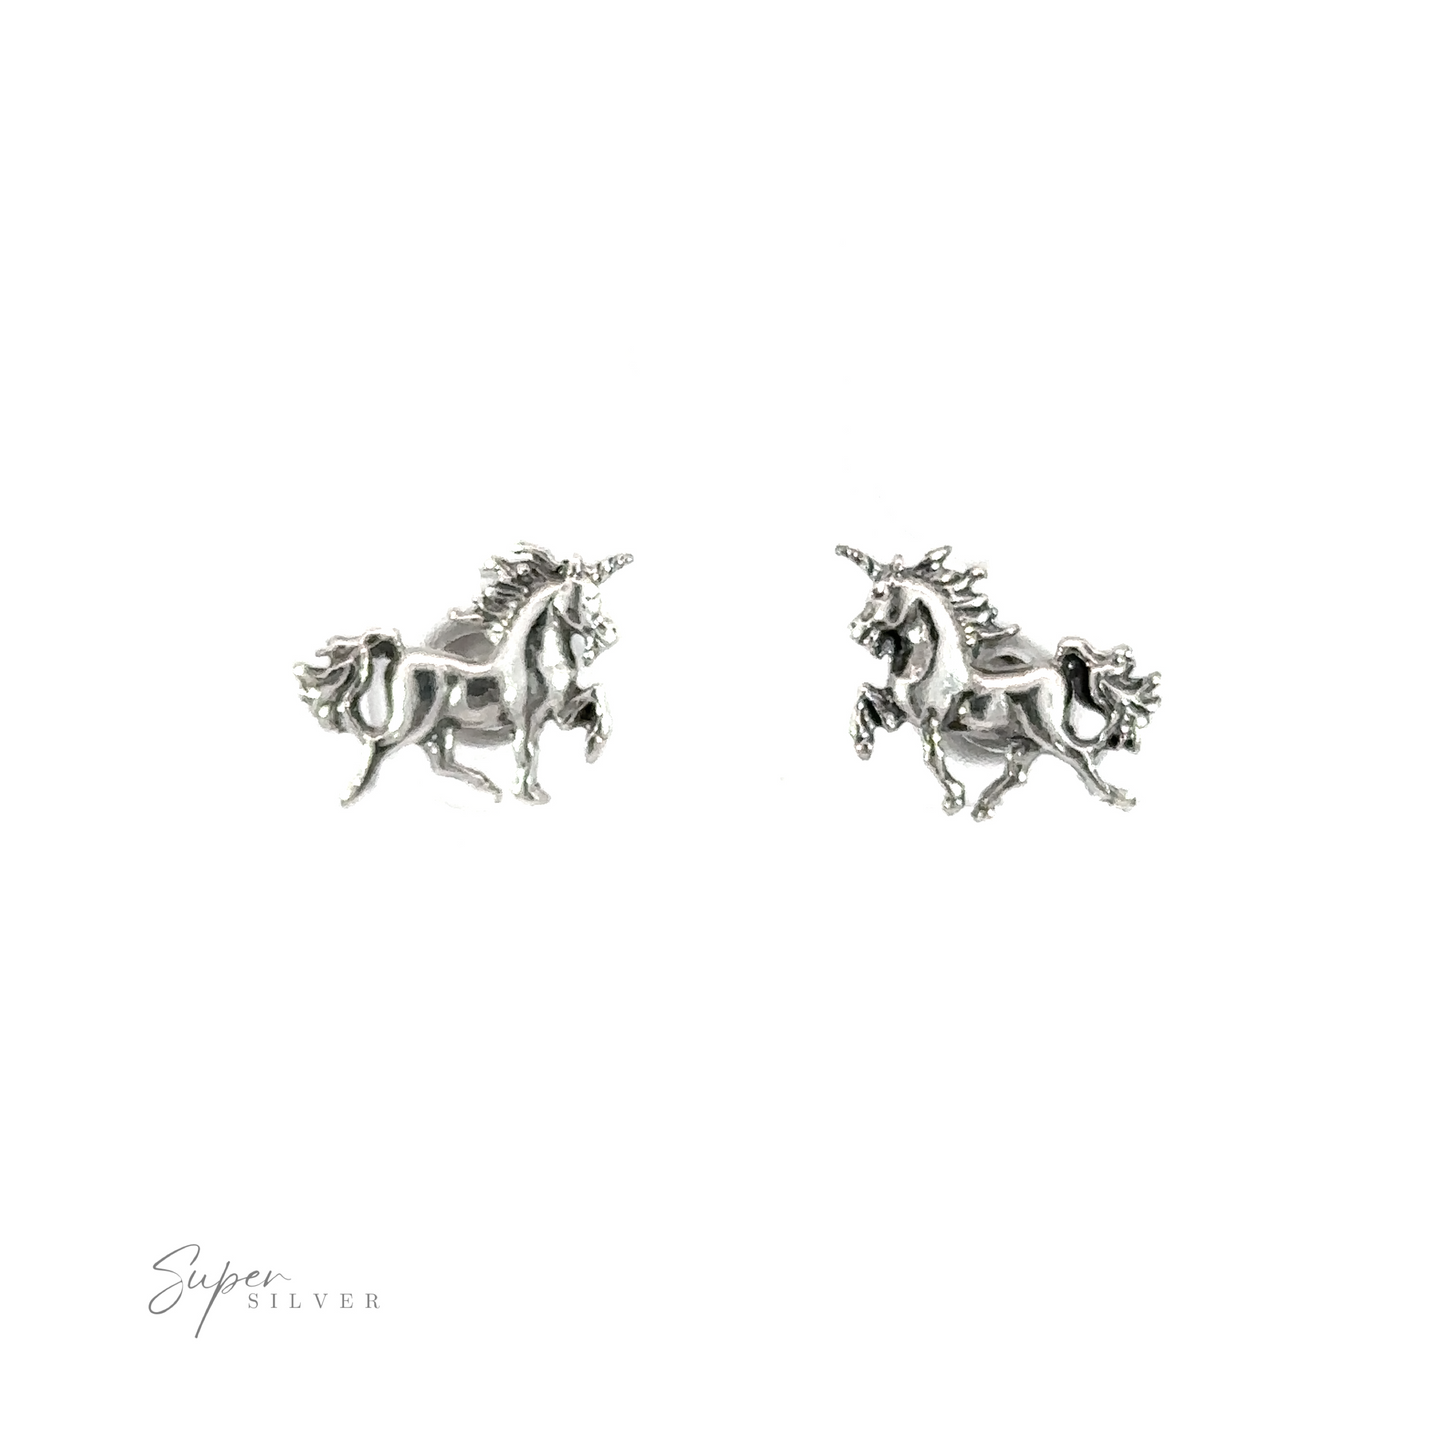 A pair of silver Unicorn Studs on a white background.